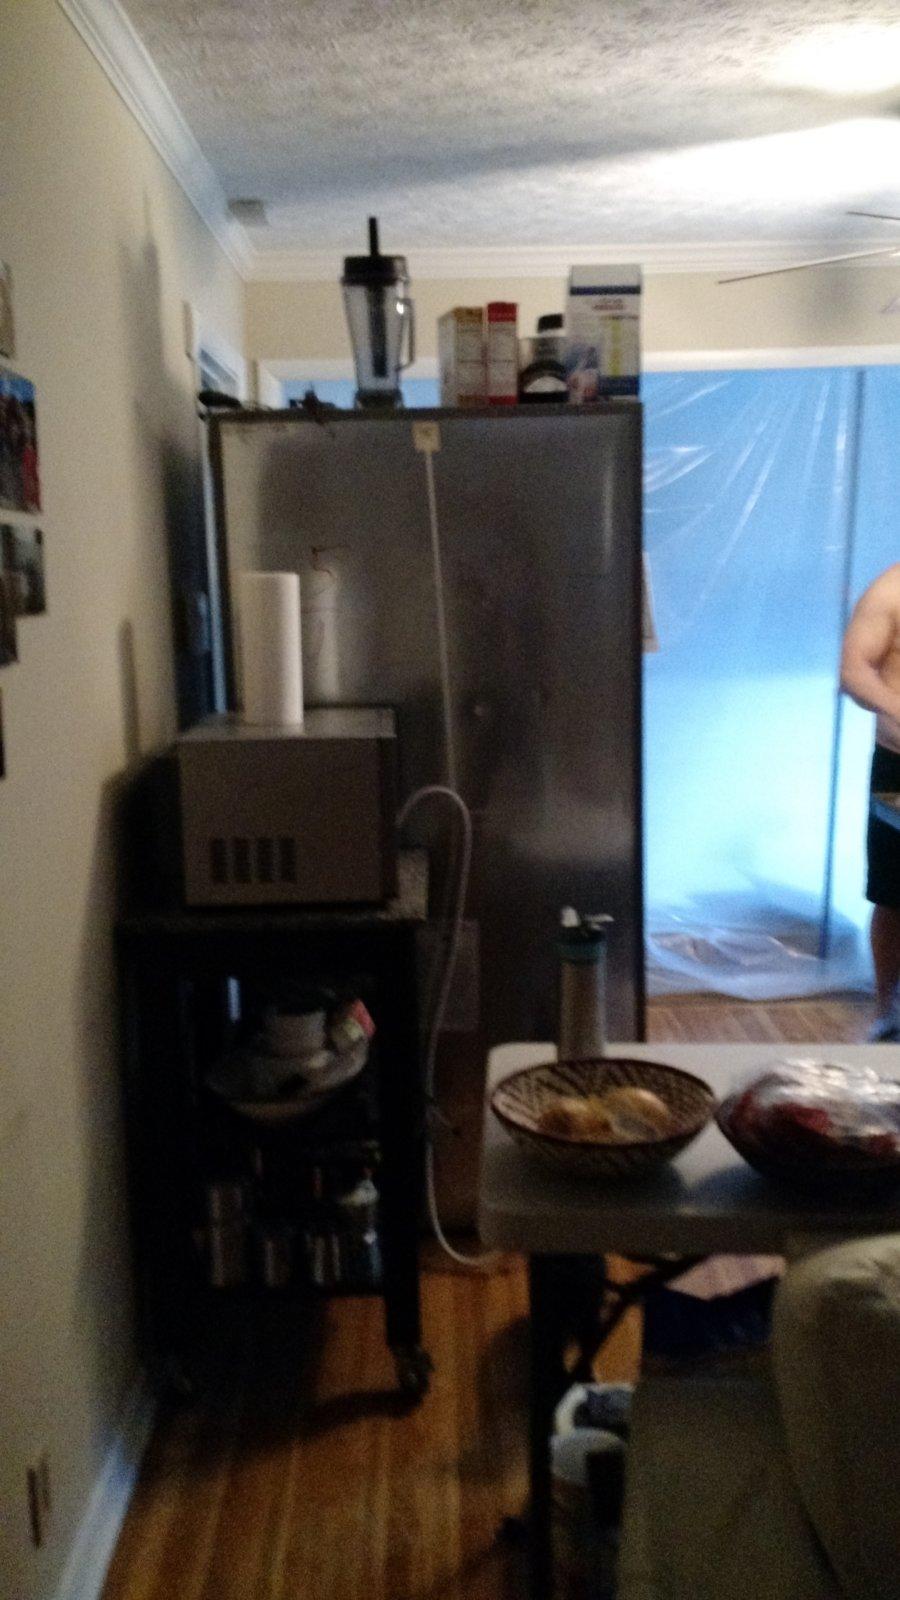 Brought the microwave back online for the remodel.